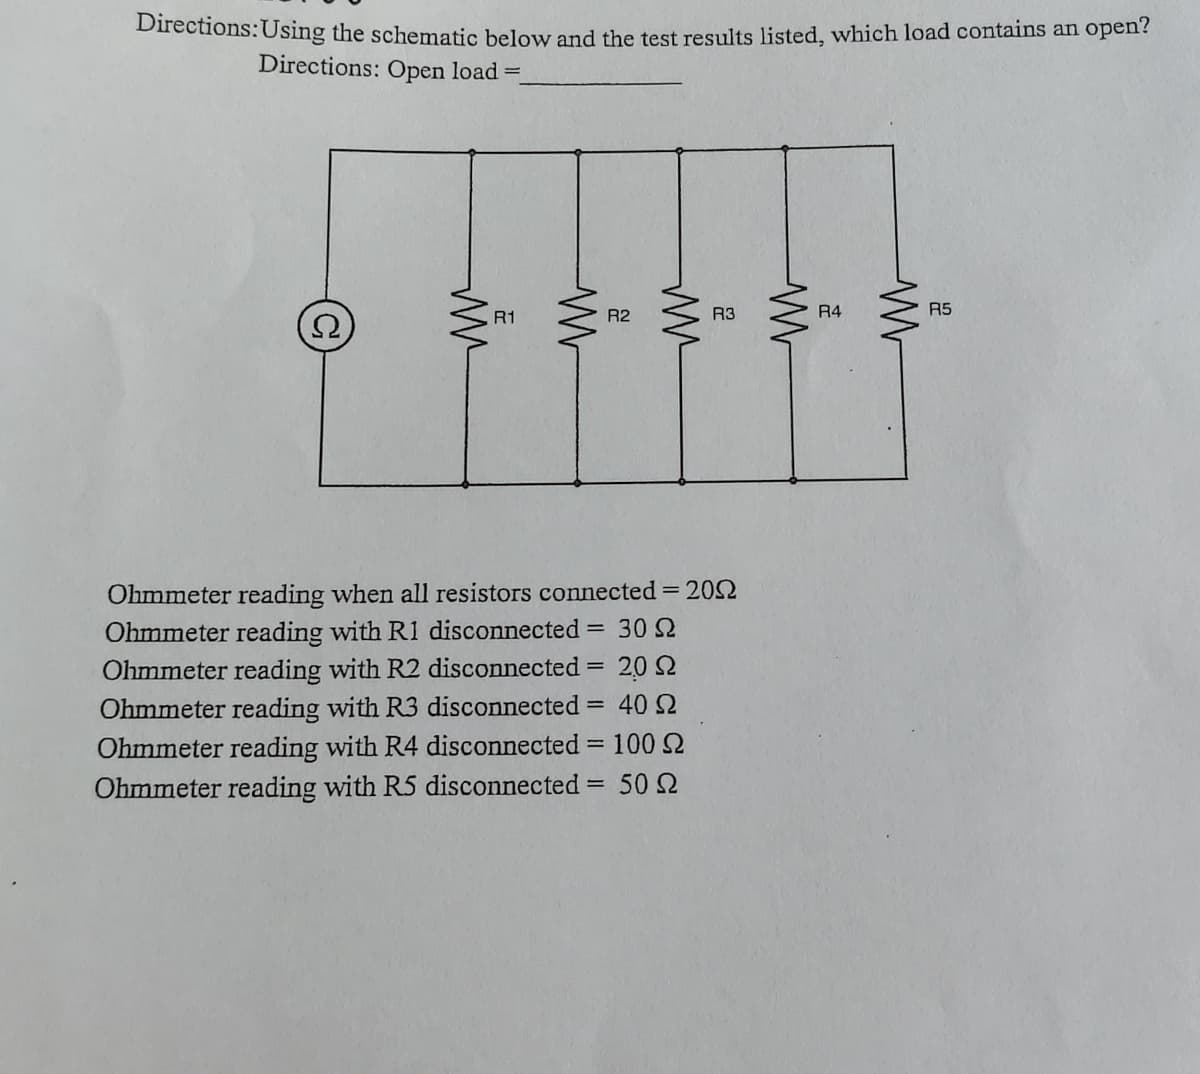 Directions:Using the schematic below and the test results listed, which load contains an open?
Directions: Open load =
R1
R2
R3
R4
R5
Ohmmeter reading when all resistors connected = 202
Ohmmeter reading with R1 disconnected = 30 2
Ohmmeter reading with R2 disconnected = 20 2
Ohmmeter reading with R3 disconnected
Ohmmeter reading with R4 disconnected = 100 2
Ohmmeter reading with R5 disconnected = 50 2
40 2
